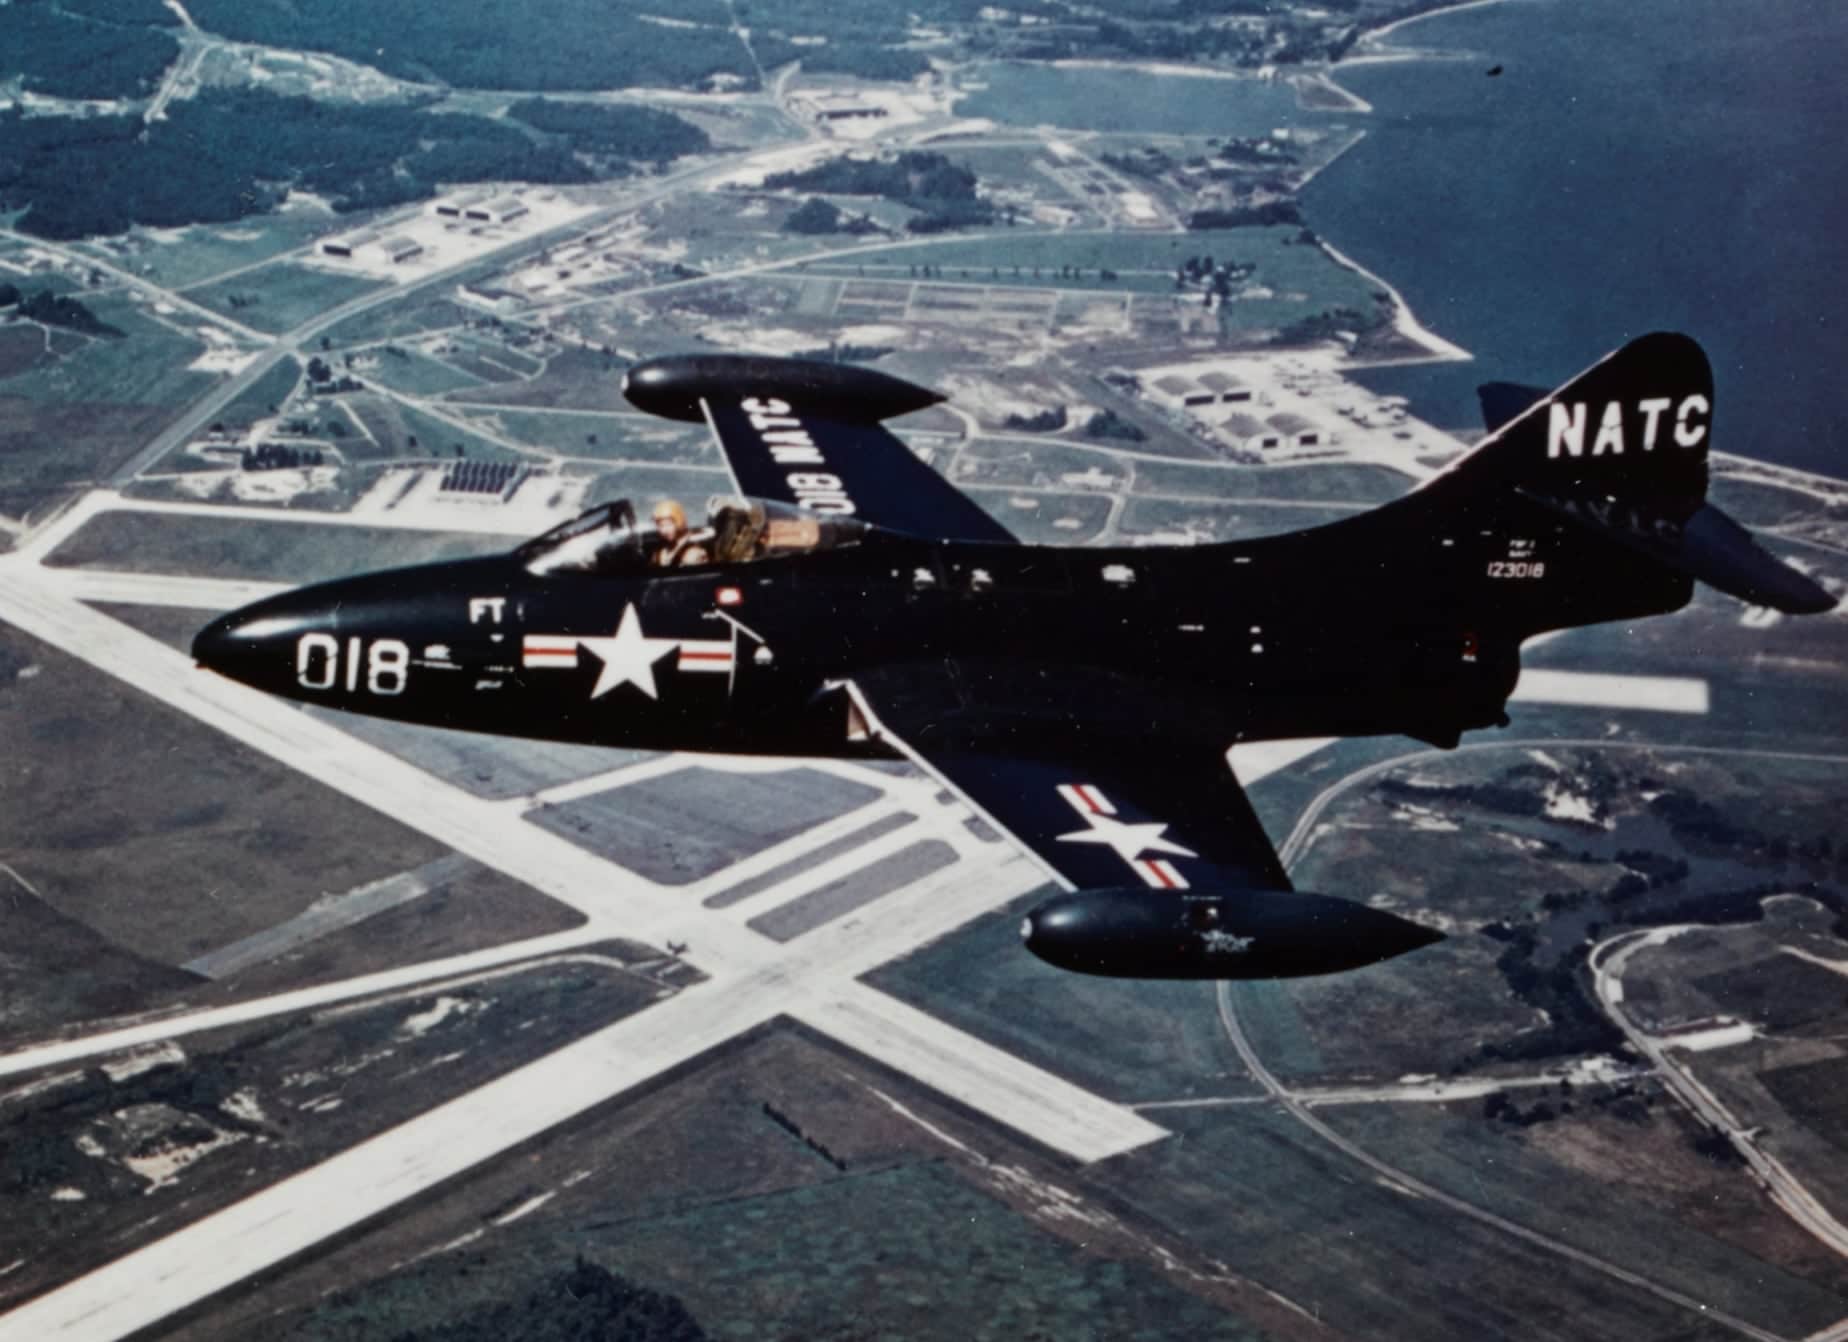 https://avgeekery.com/wp-content/uploads/2017/11/Grumman_F9F-2_Panther_in_flight_over_Naval_Air_Station_Patuxent_River_in_the_1950s_NH_101804-KN.jpg